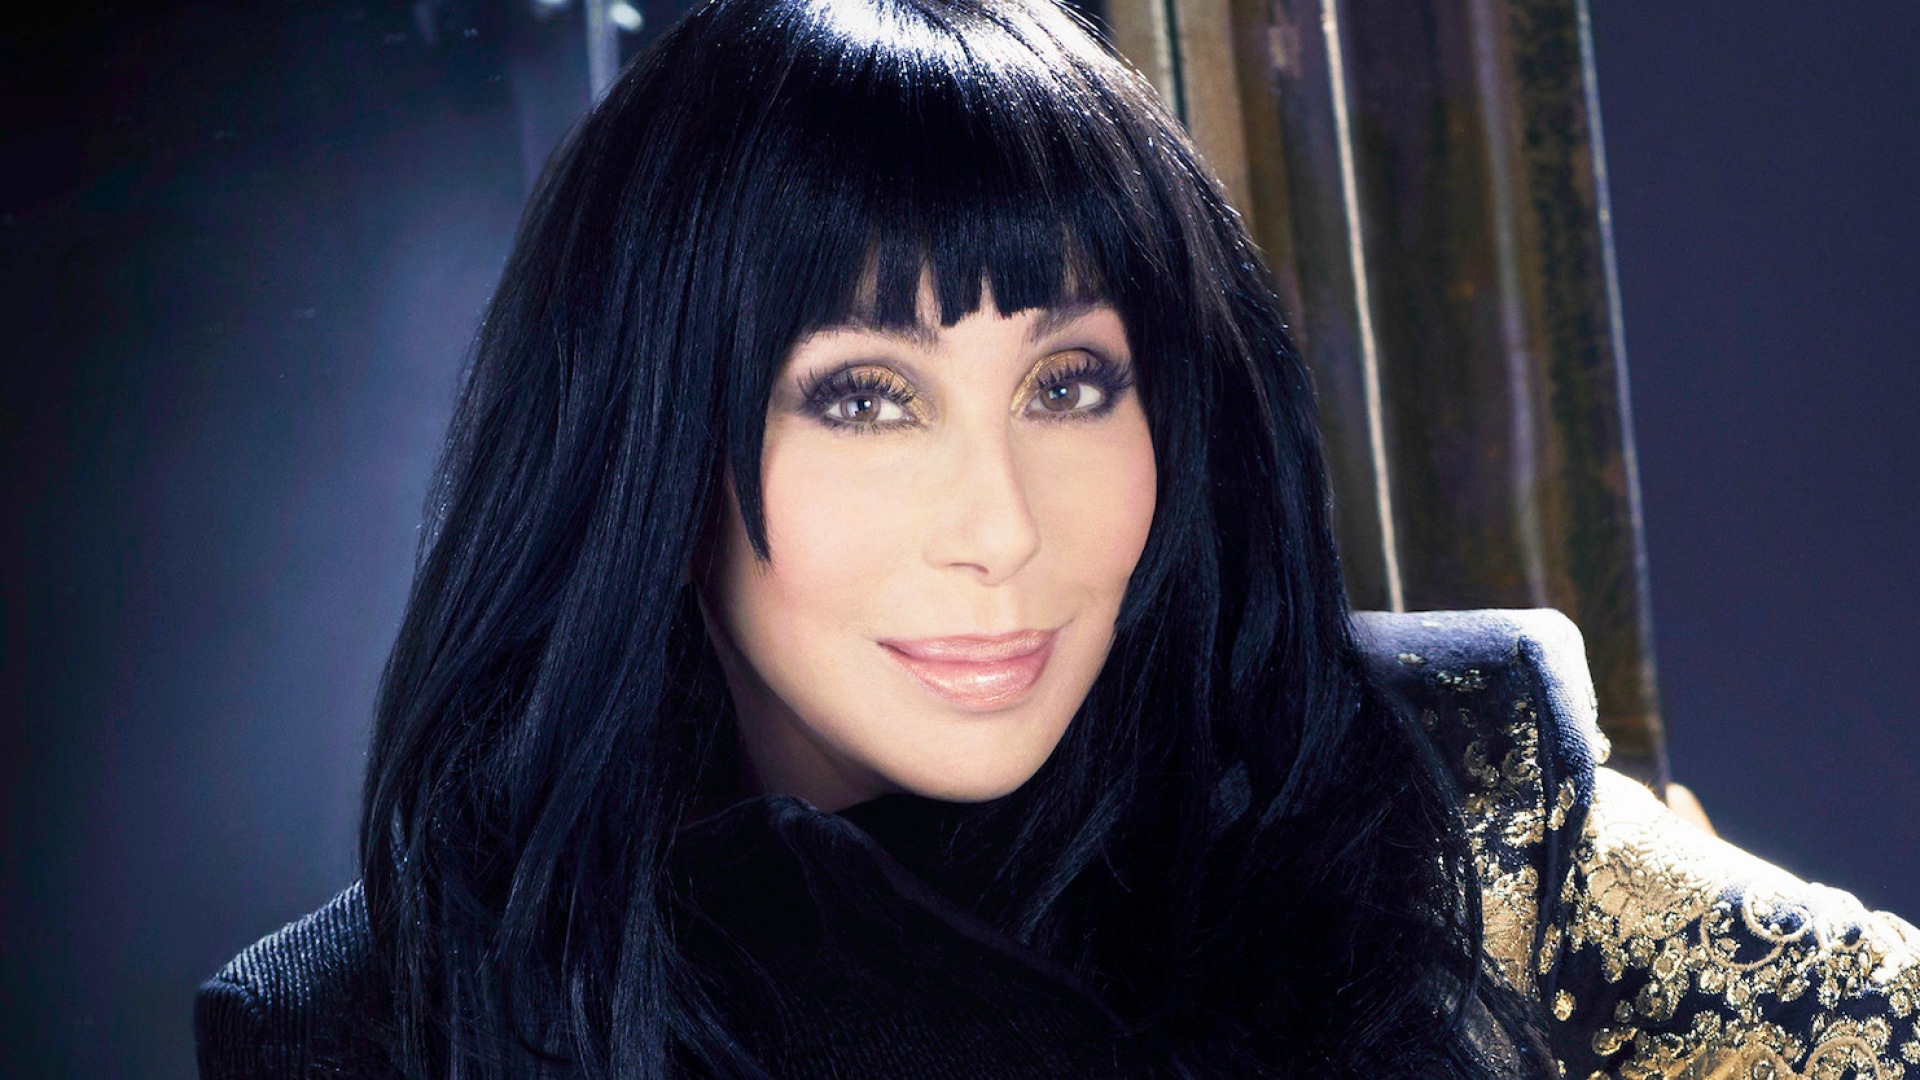 How old is Cher